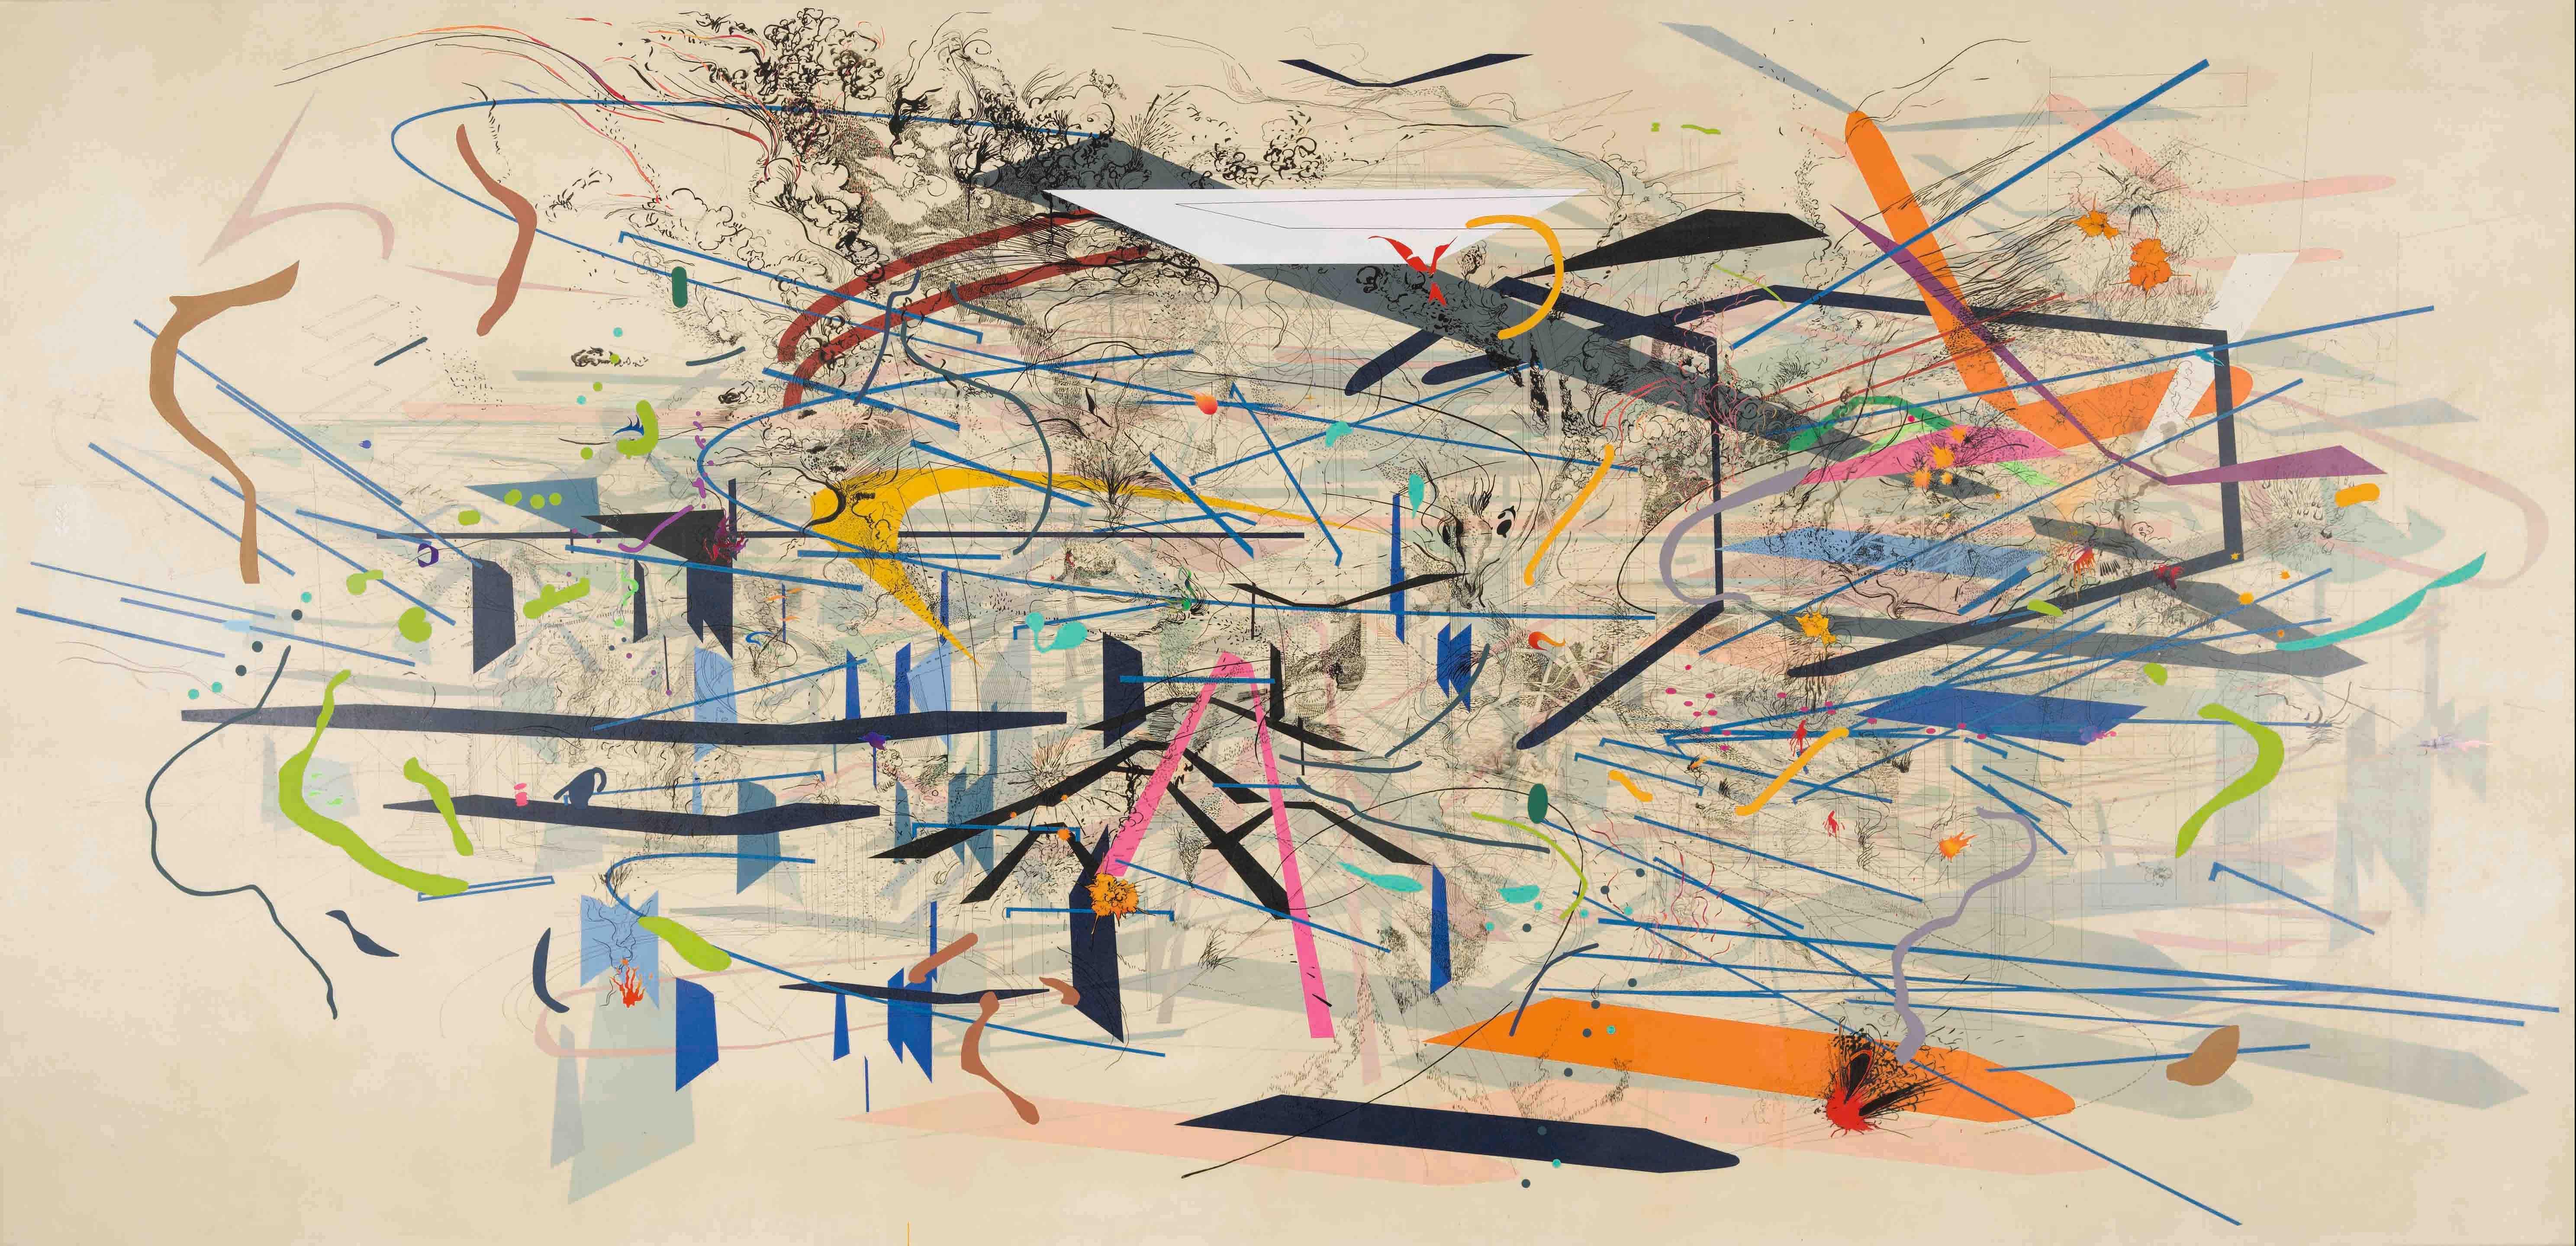 First Comprehensive Survey of Julie Mehretu is at The Whitney Art